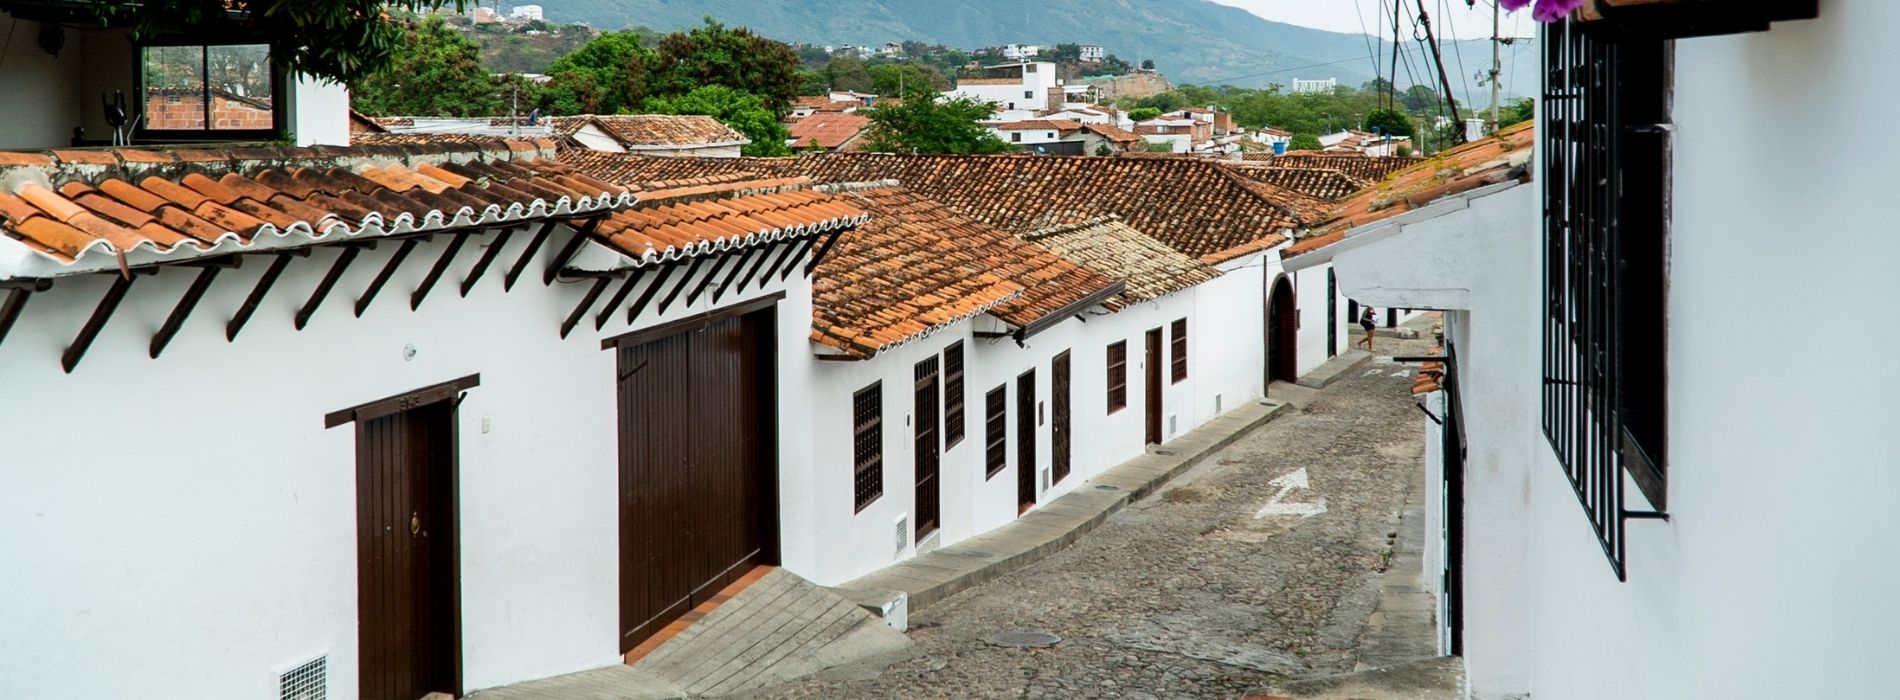 Colonial streets of colombia